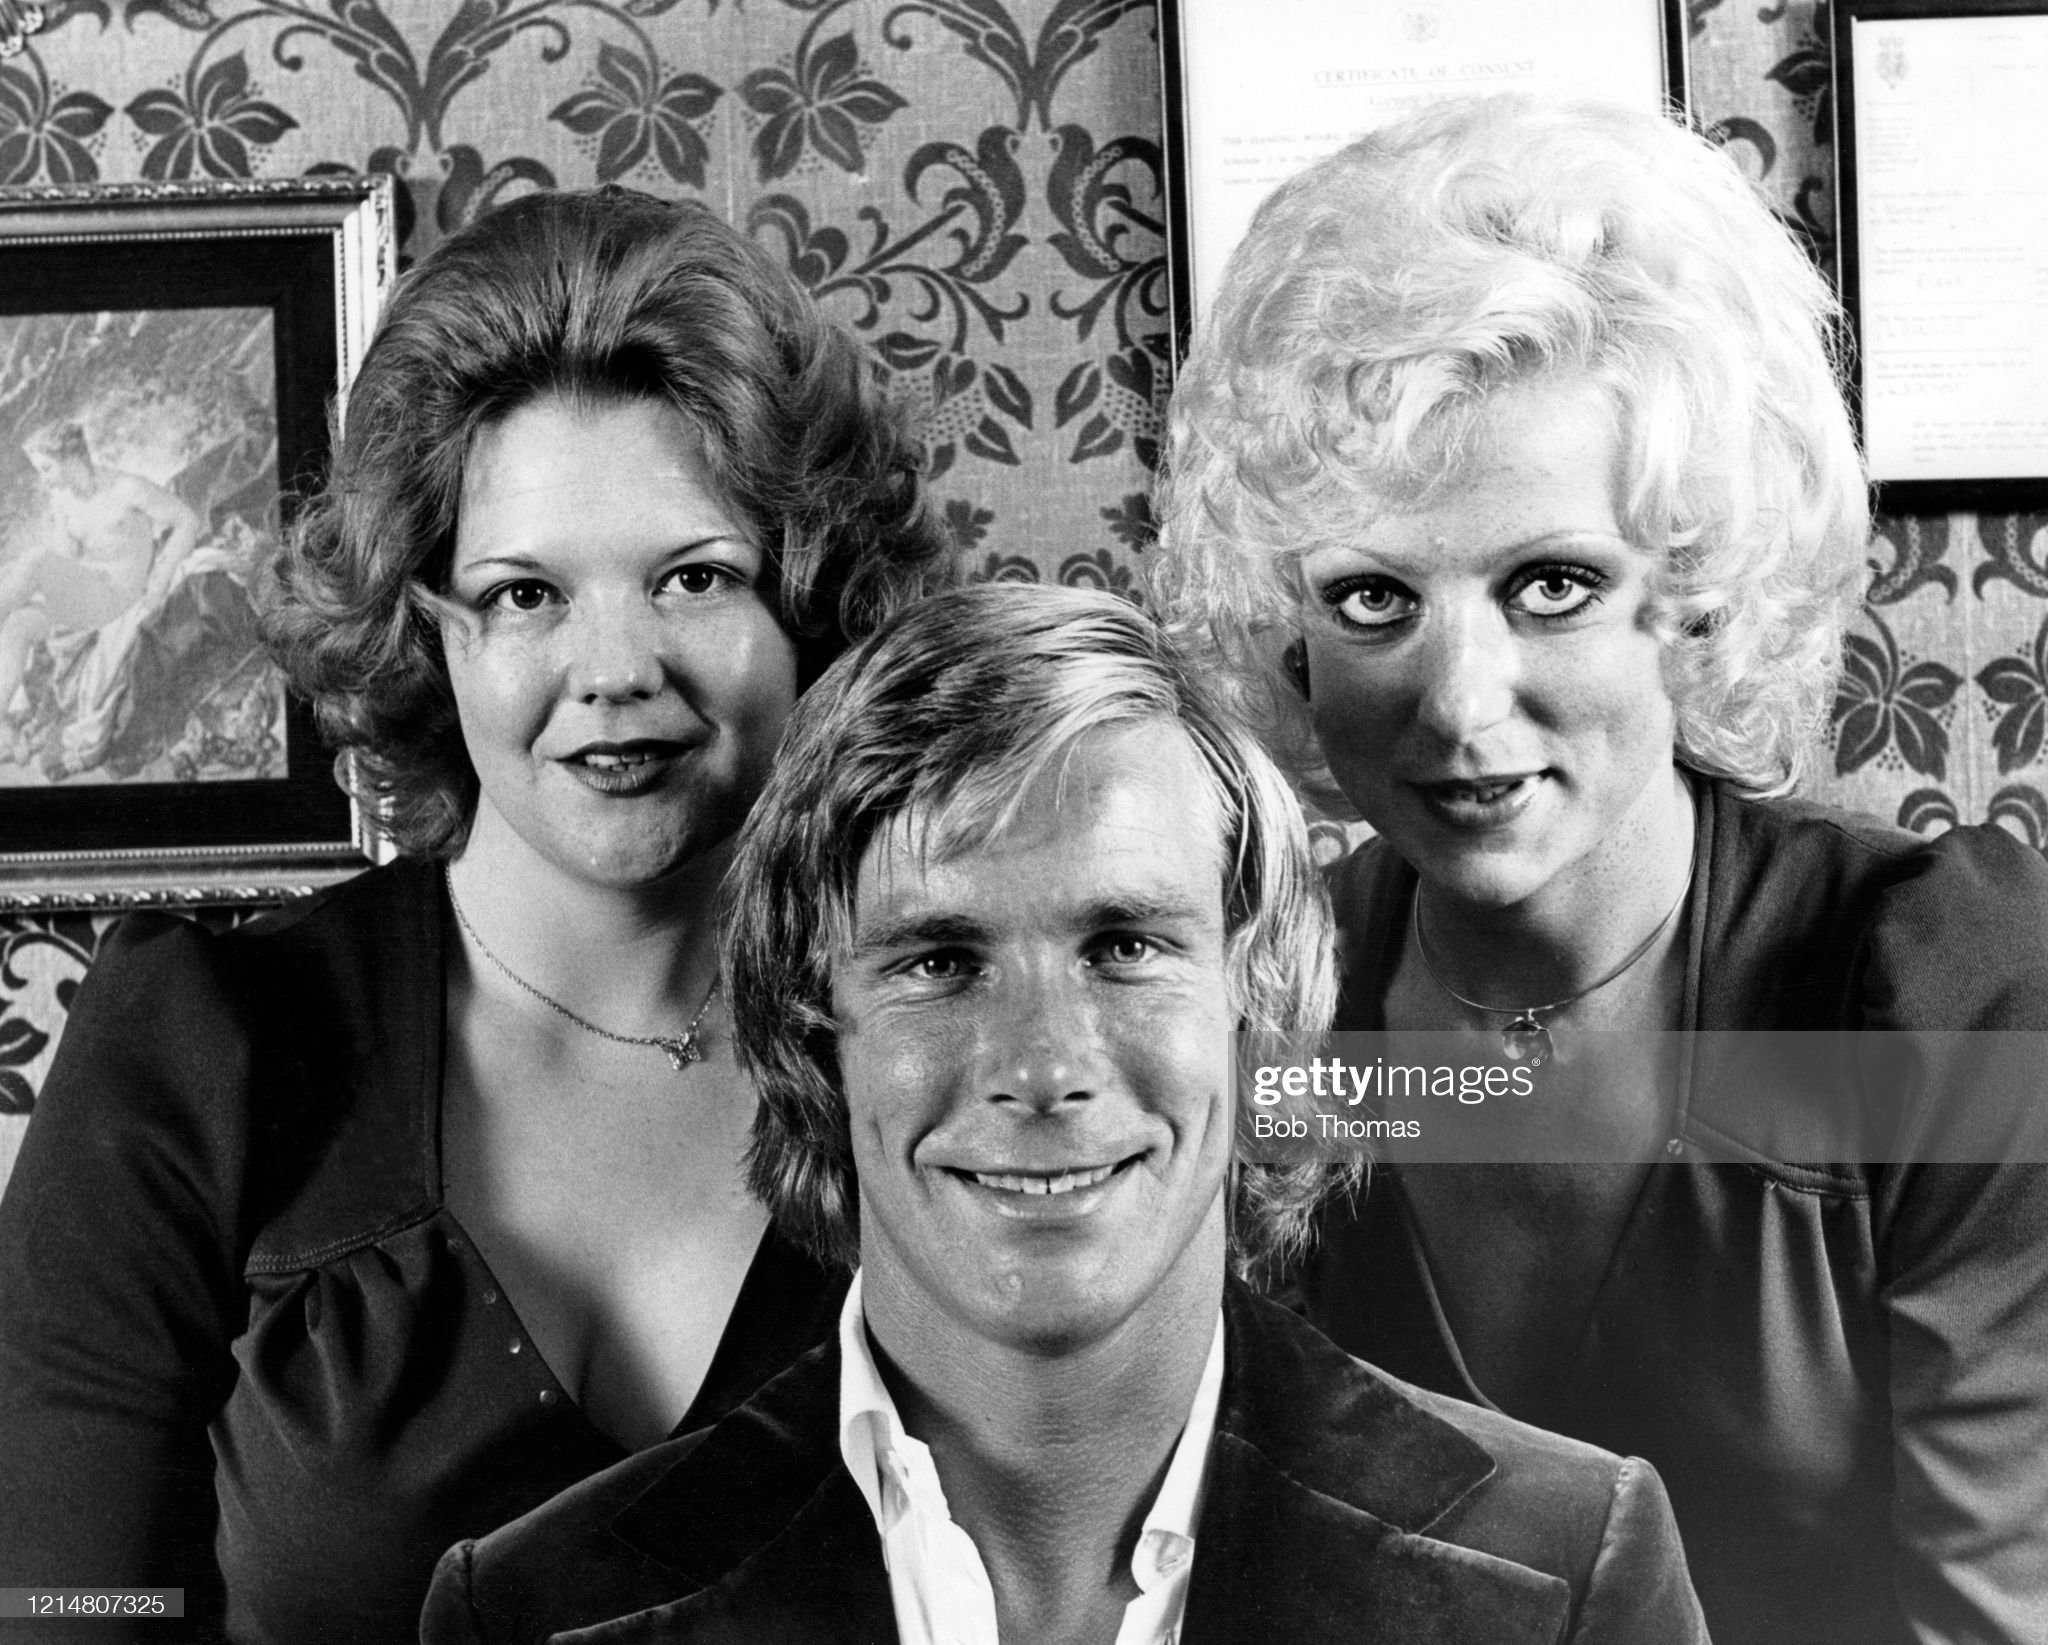 James Hunt at the opening of the Rubicon Casino and Sporting Club in Northampton in 1975 or 1976. 